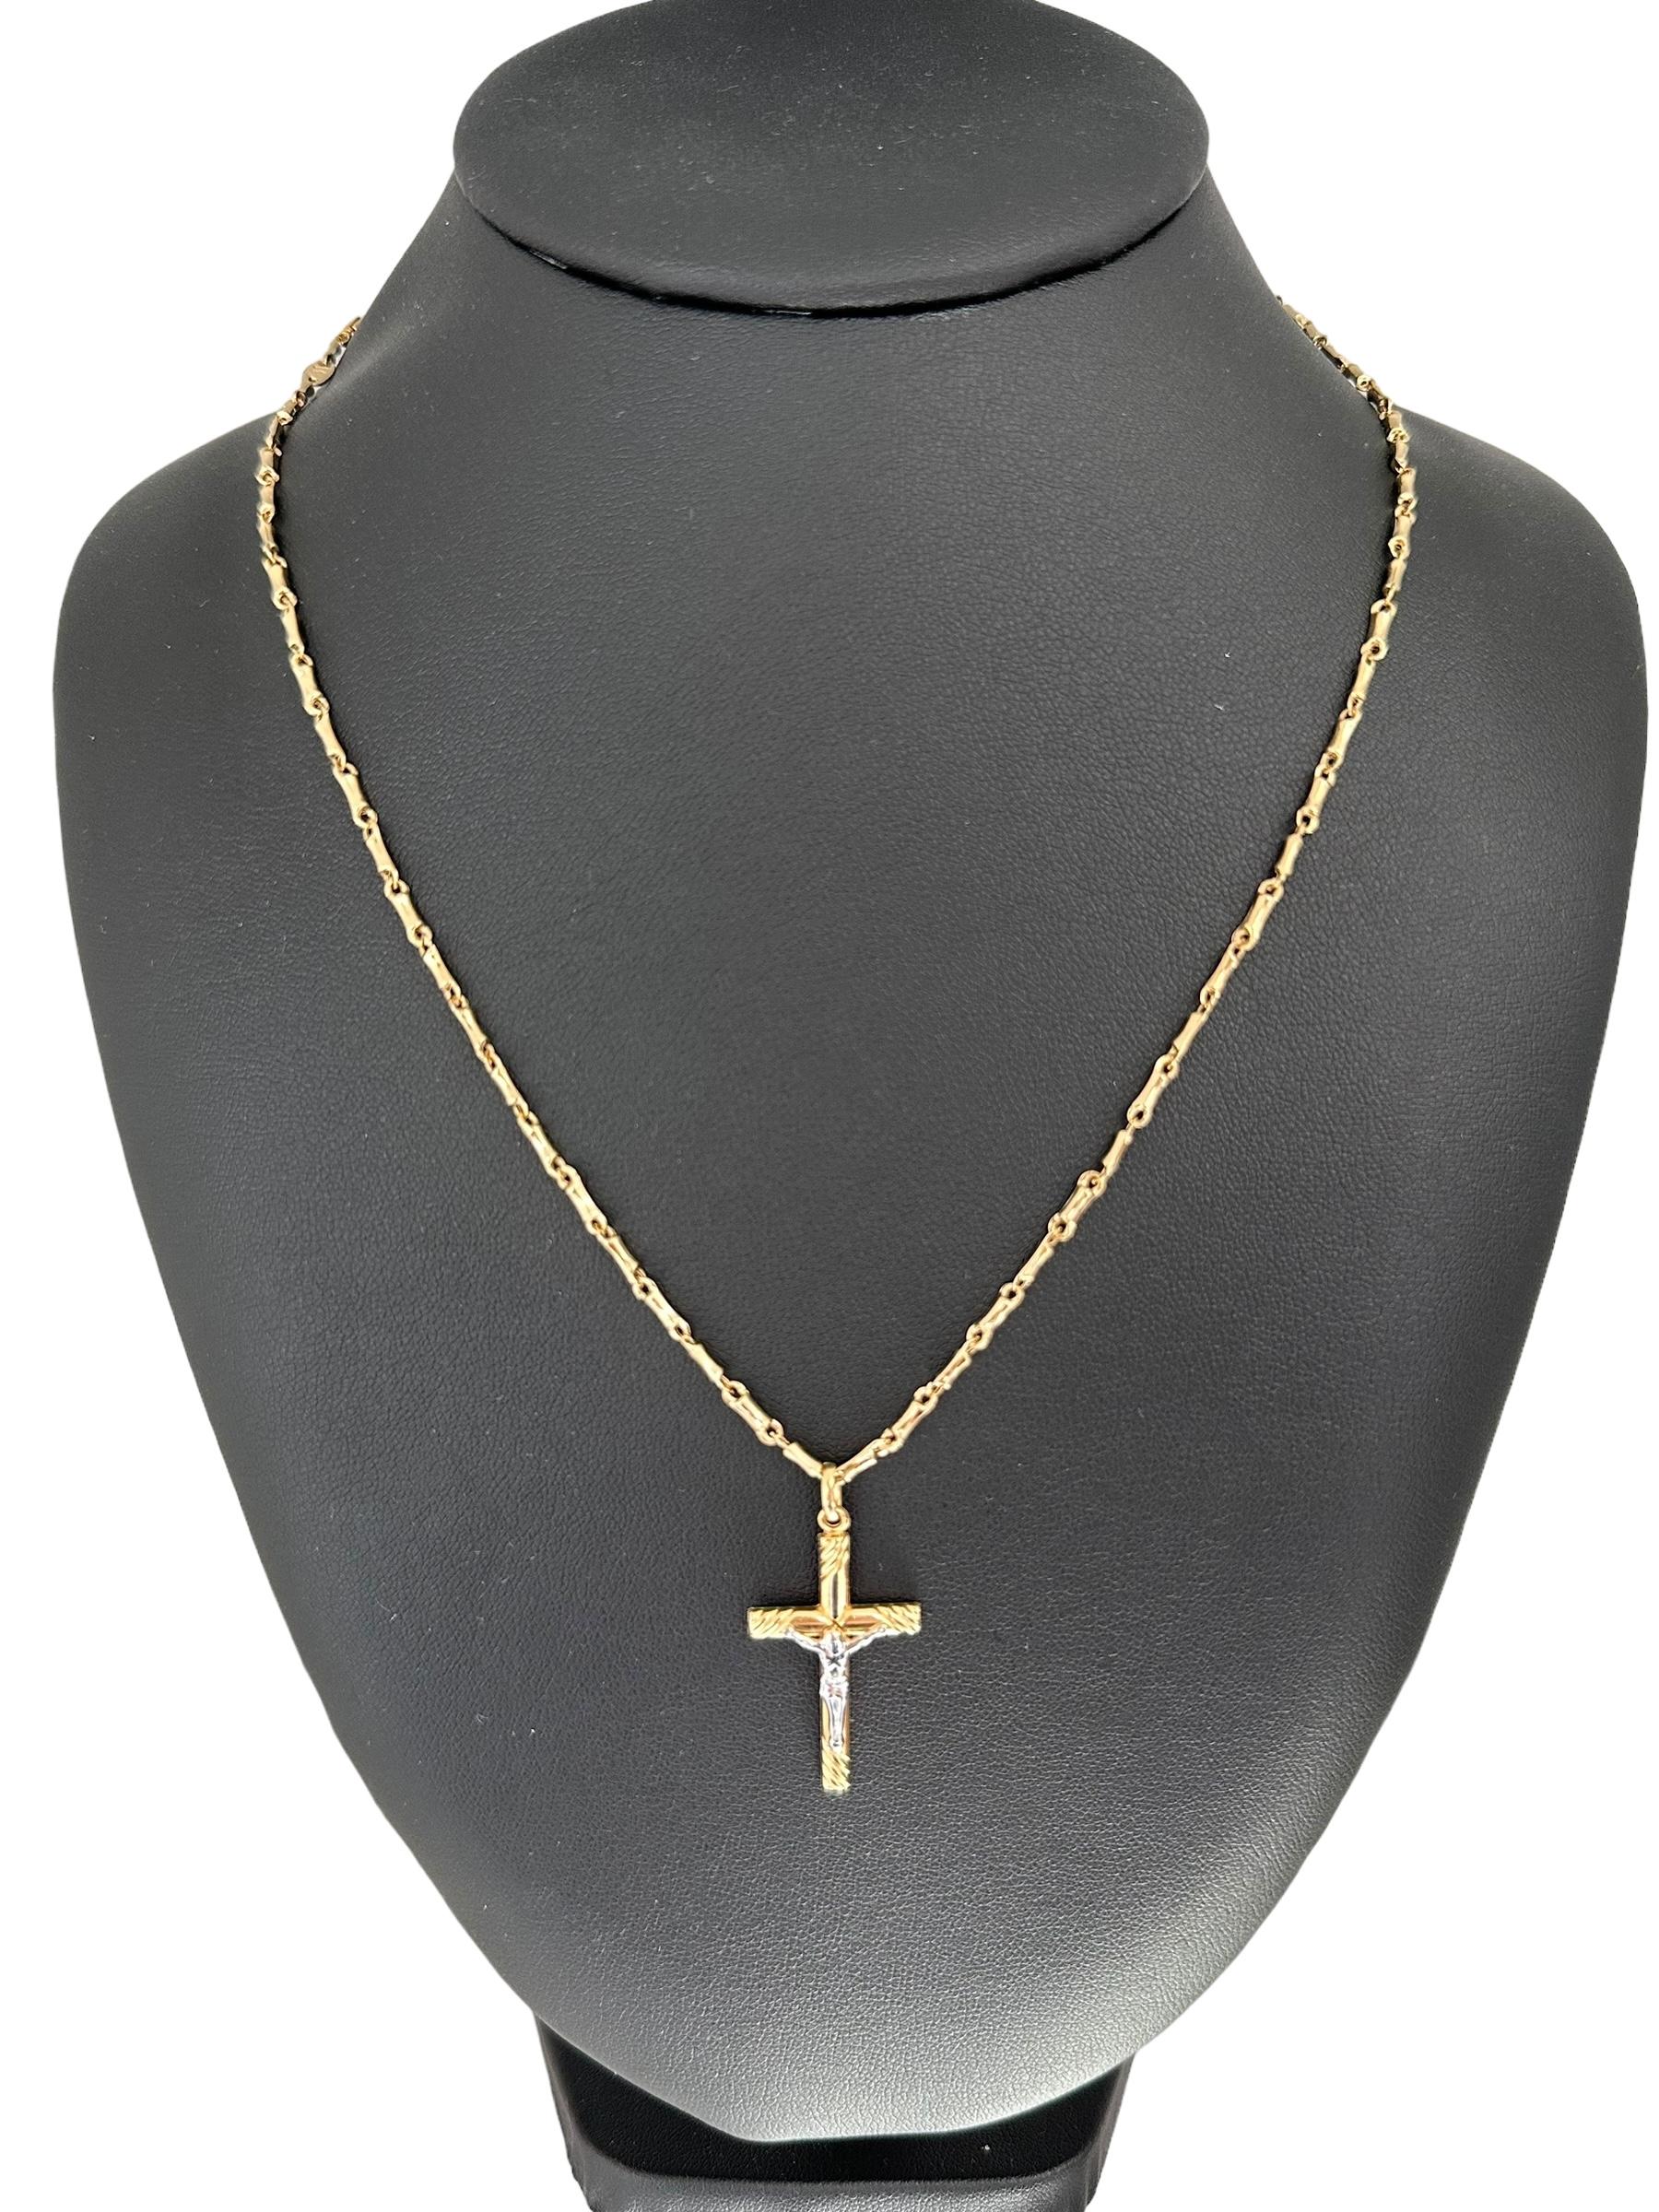 This Italian Gold Crucifix with Bamboo Links Chain is a beautiful and meaningful piece of religious jewelry. Crafted from high-quality 18kt yellow gold, the crucifix features intricate detailing and a polished finish, highlighting its exquisite